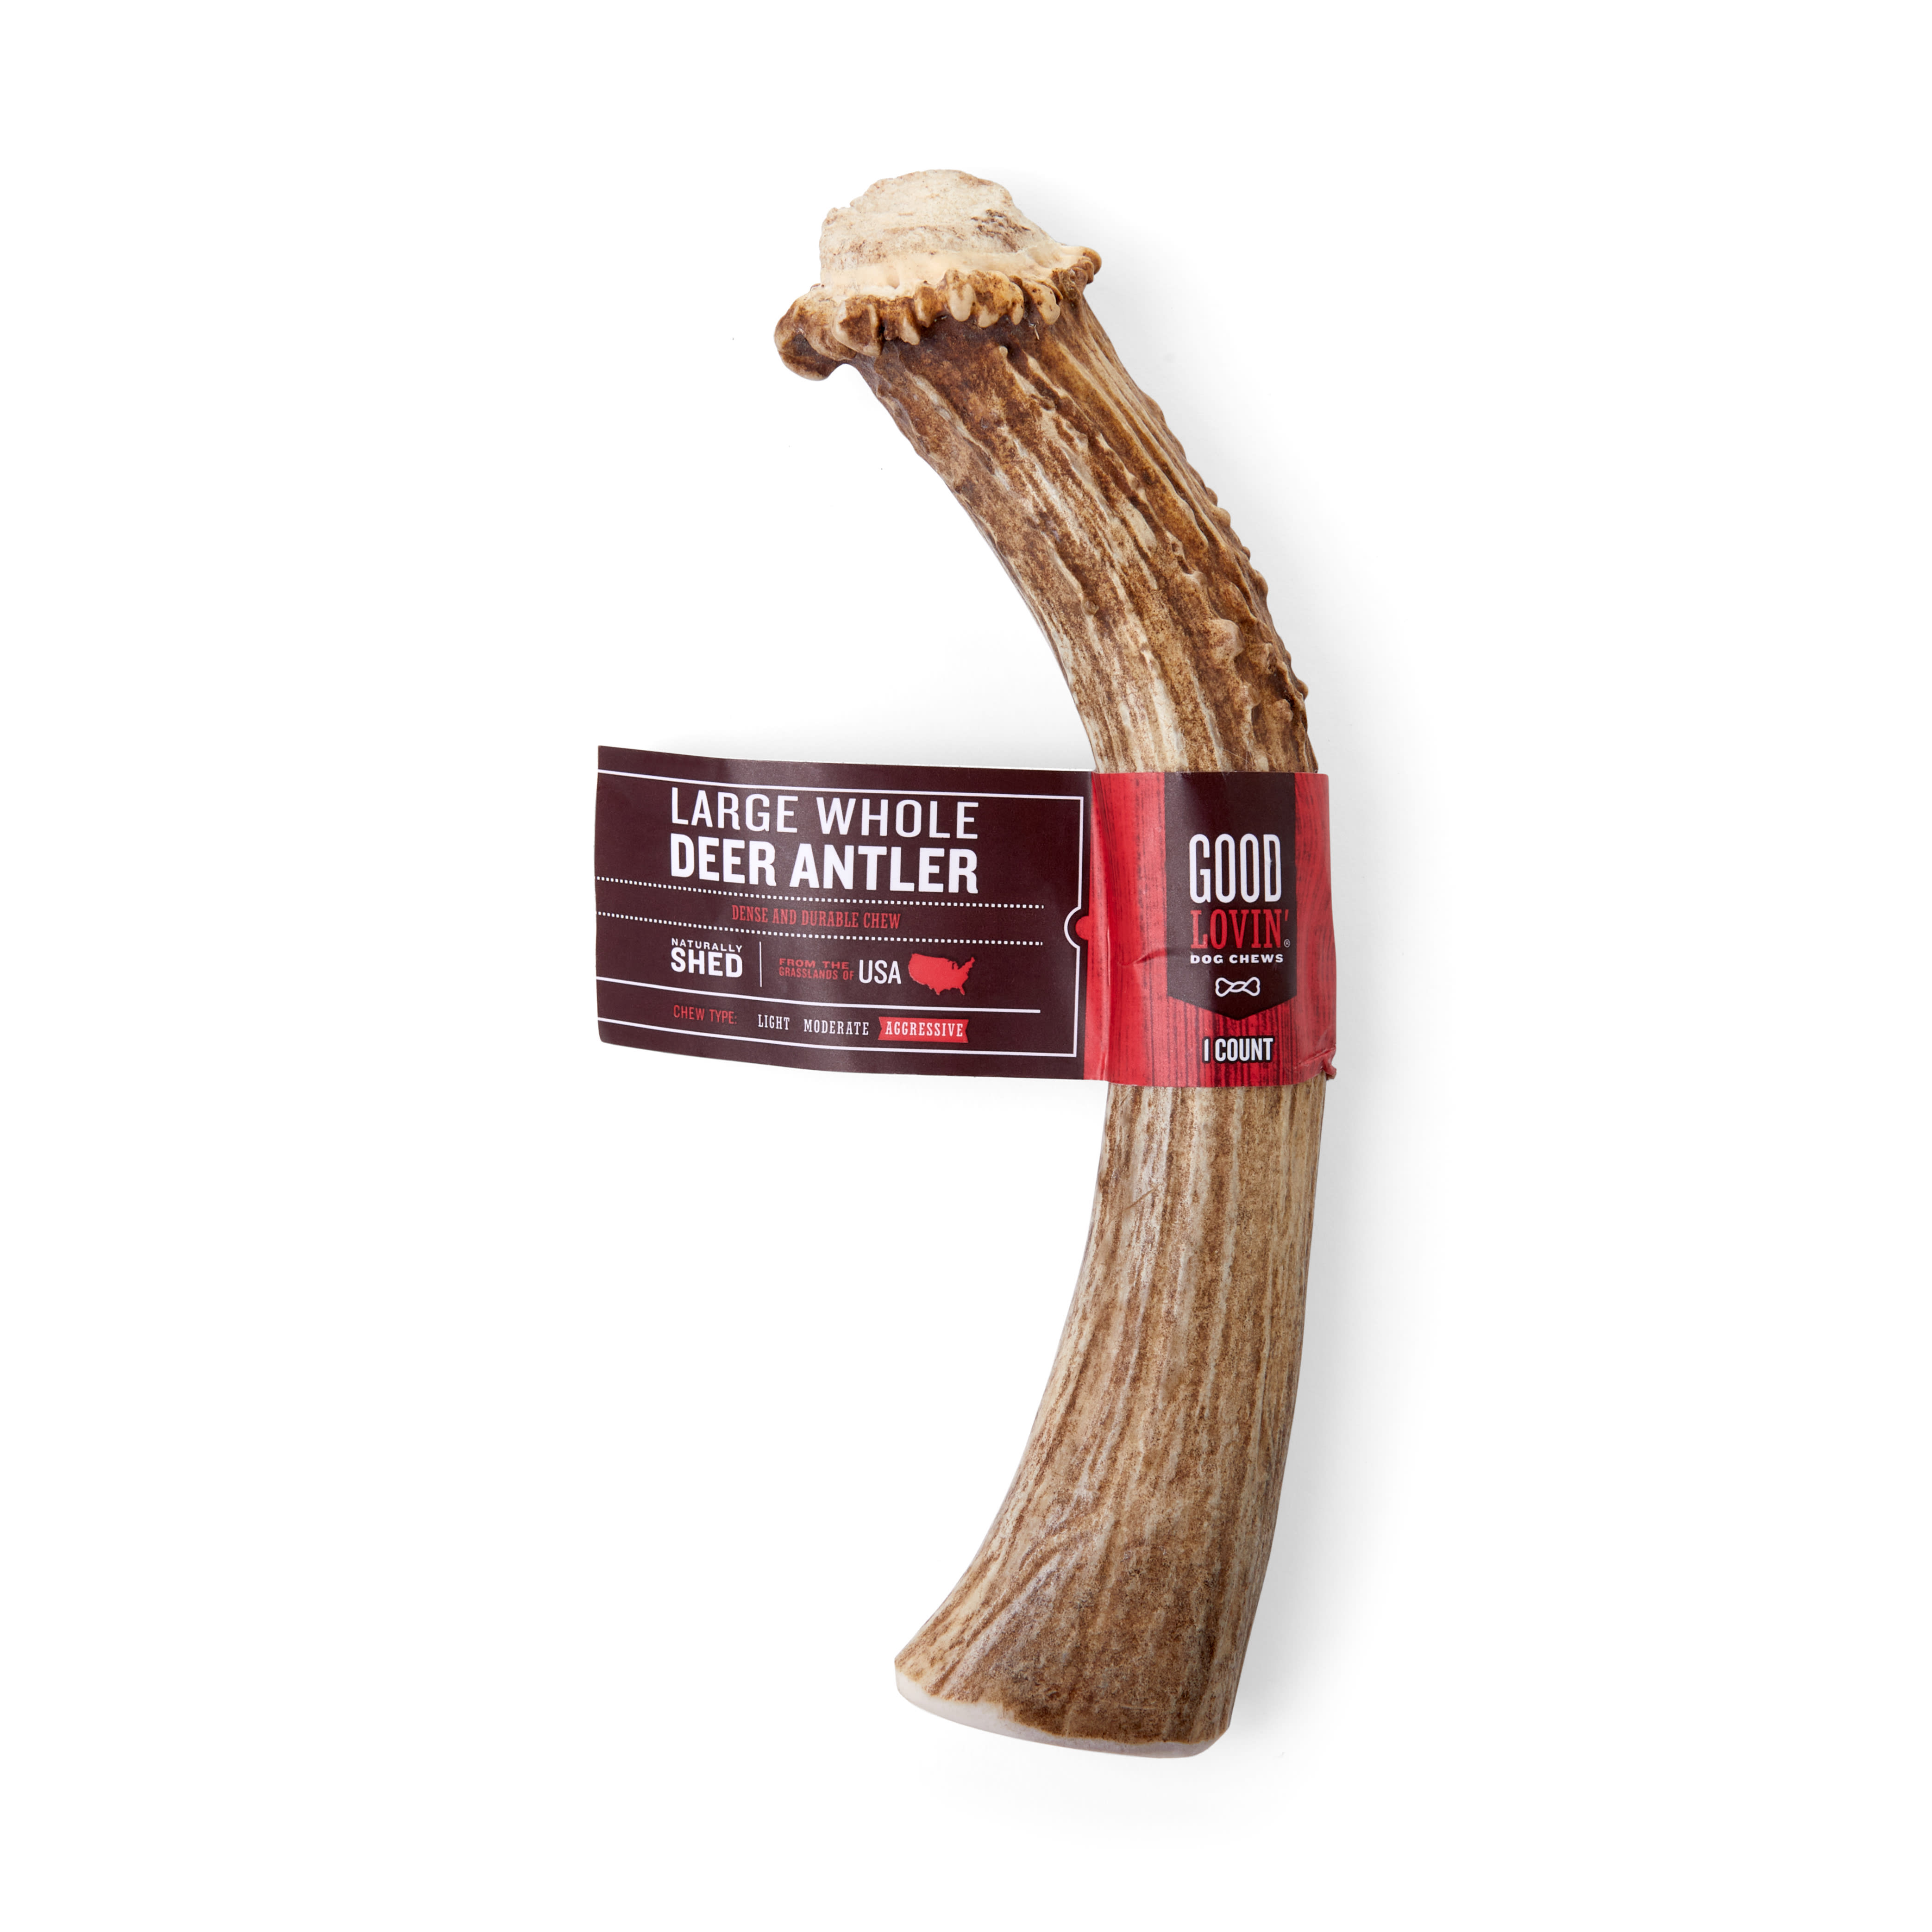 MAIKAI PETS - Deer Antler for Dogs (S 2 pcs) - Chews for dogs